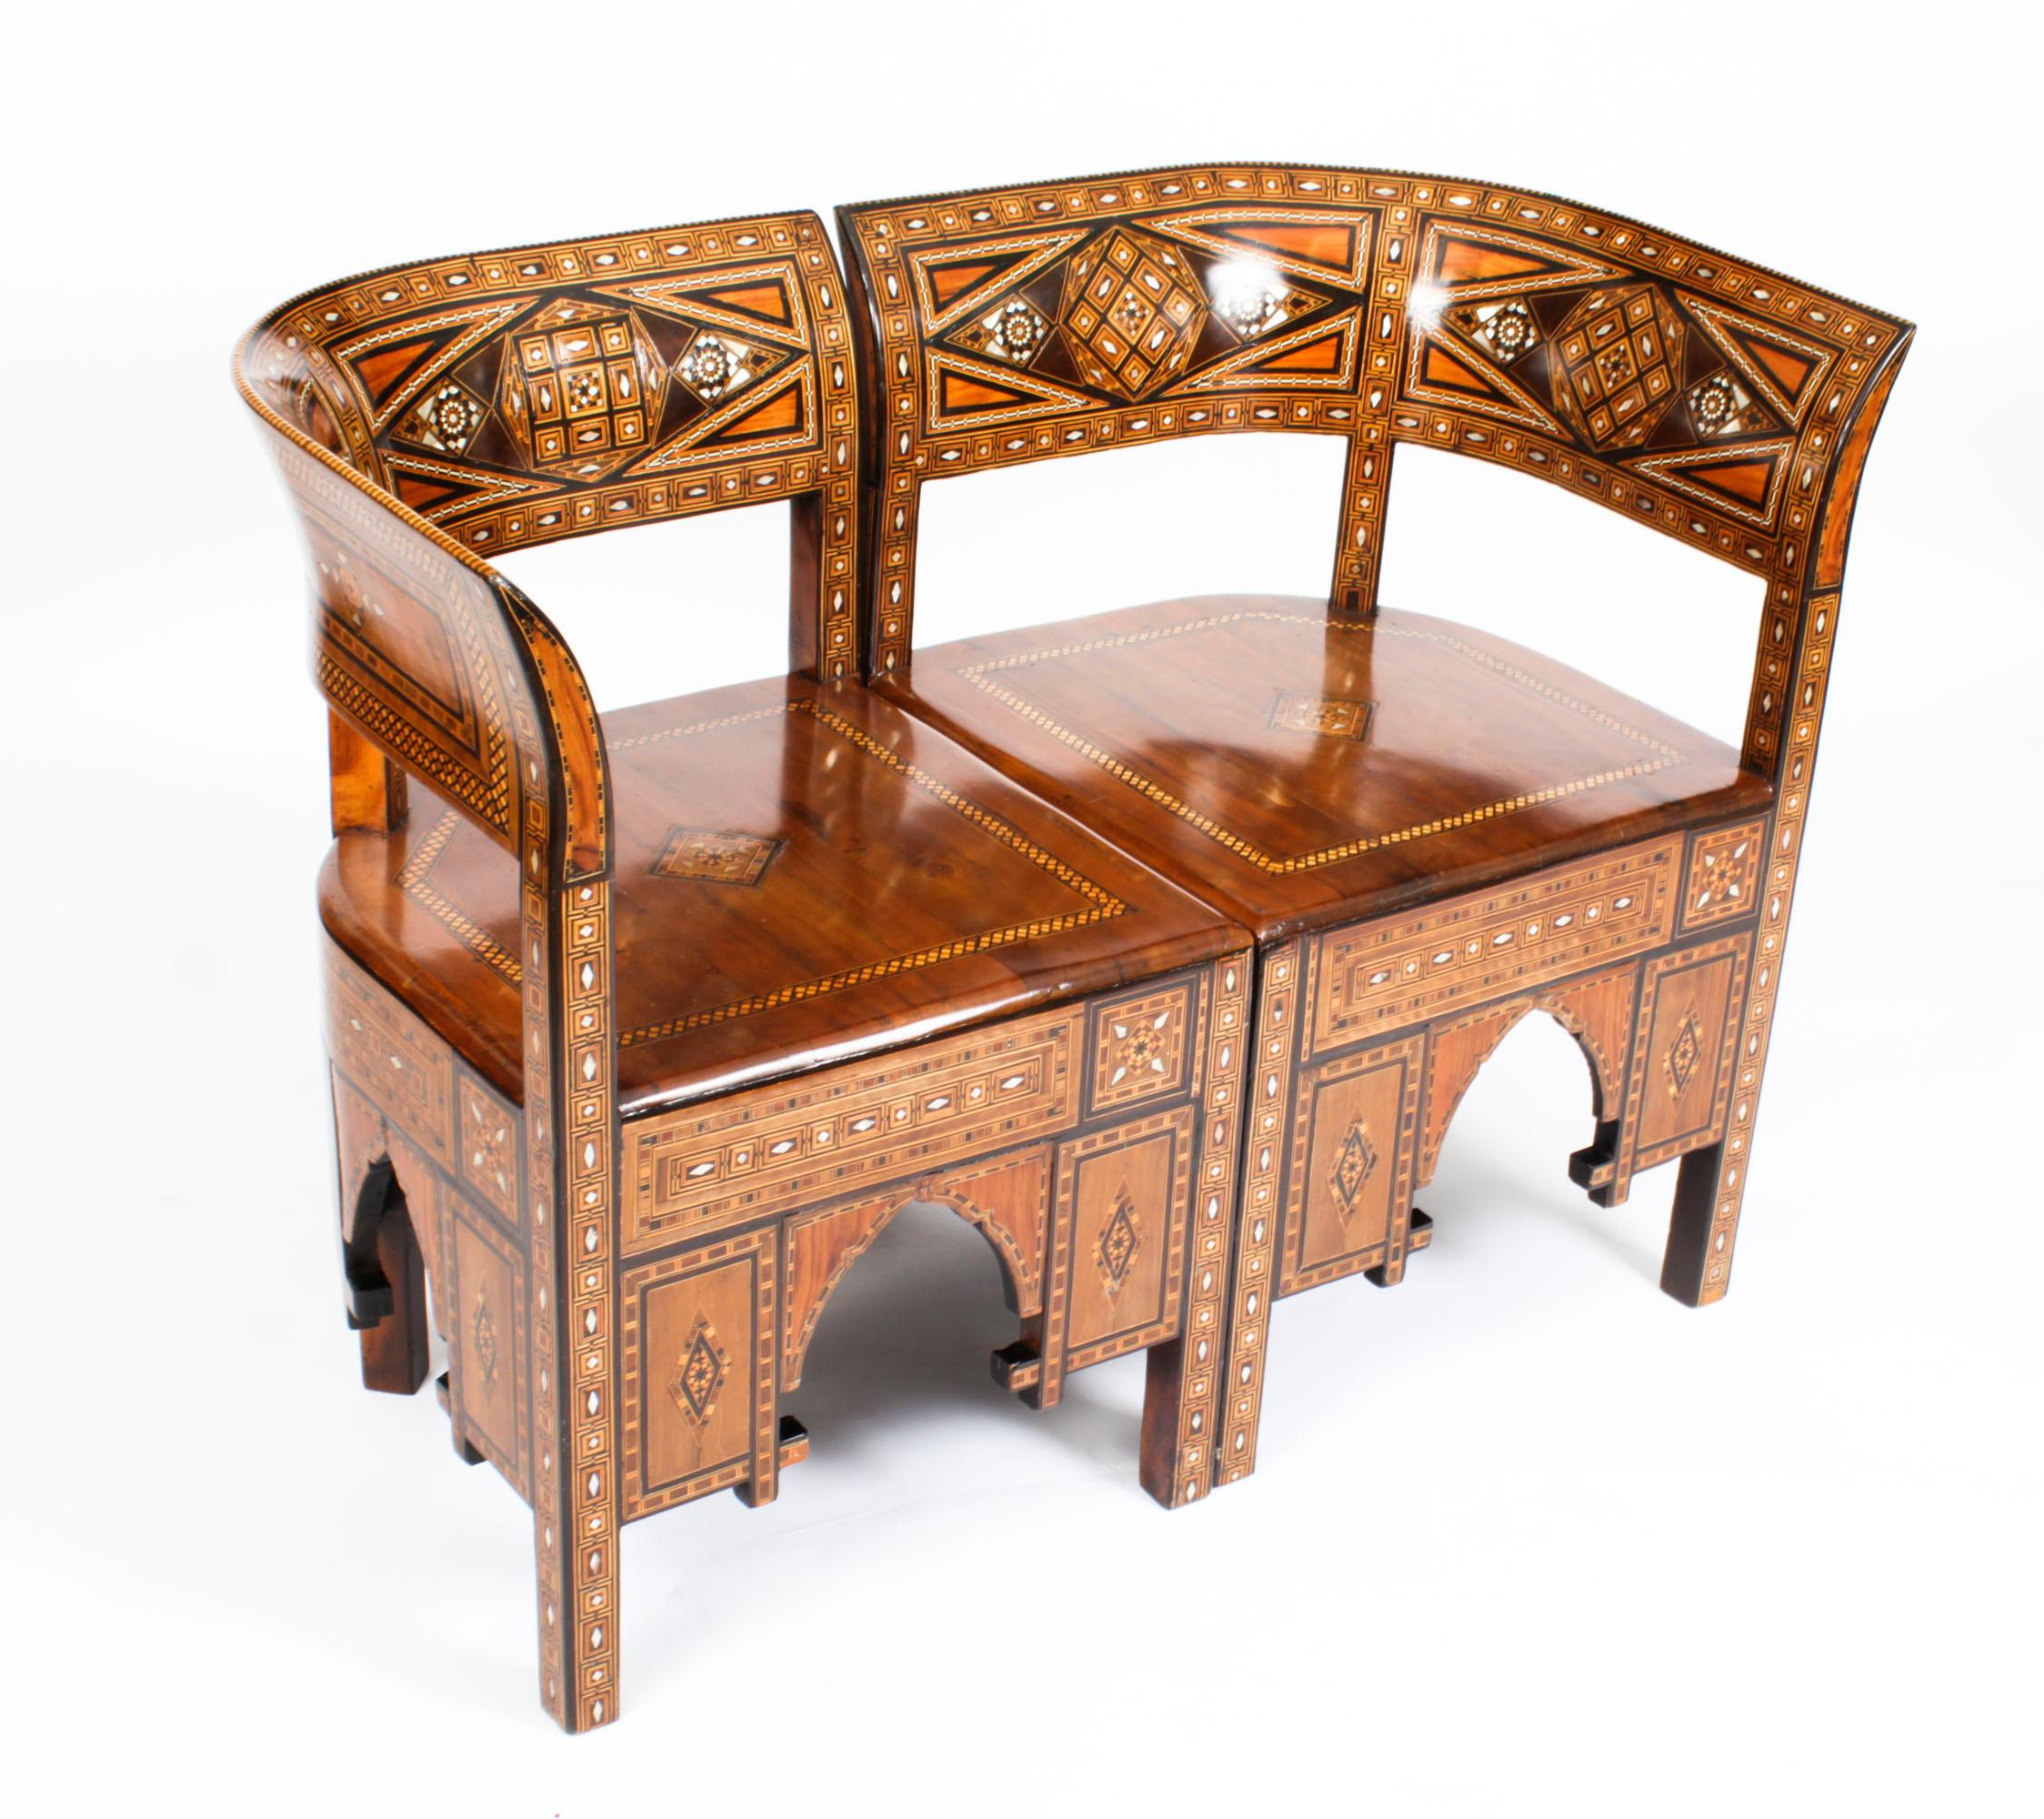 Hardwood Antique Set of 4 Syrian Parquetry Inlaid Armchairs, Early 20th Century For Sale